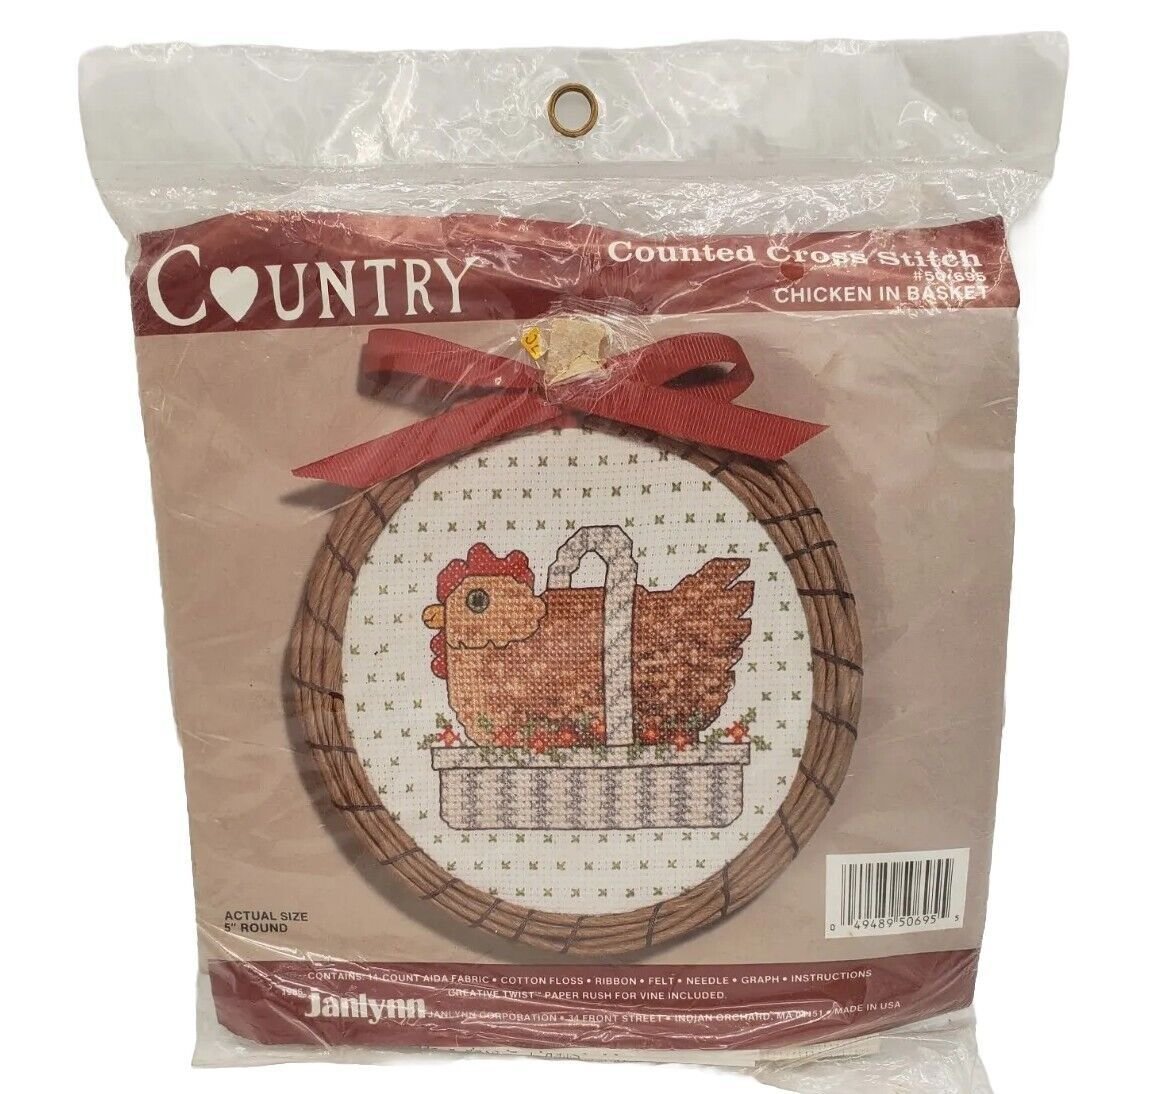 Janlynn Country Counted Cross Stitch Kit Chicken In Bas